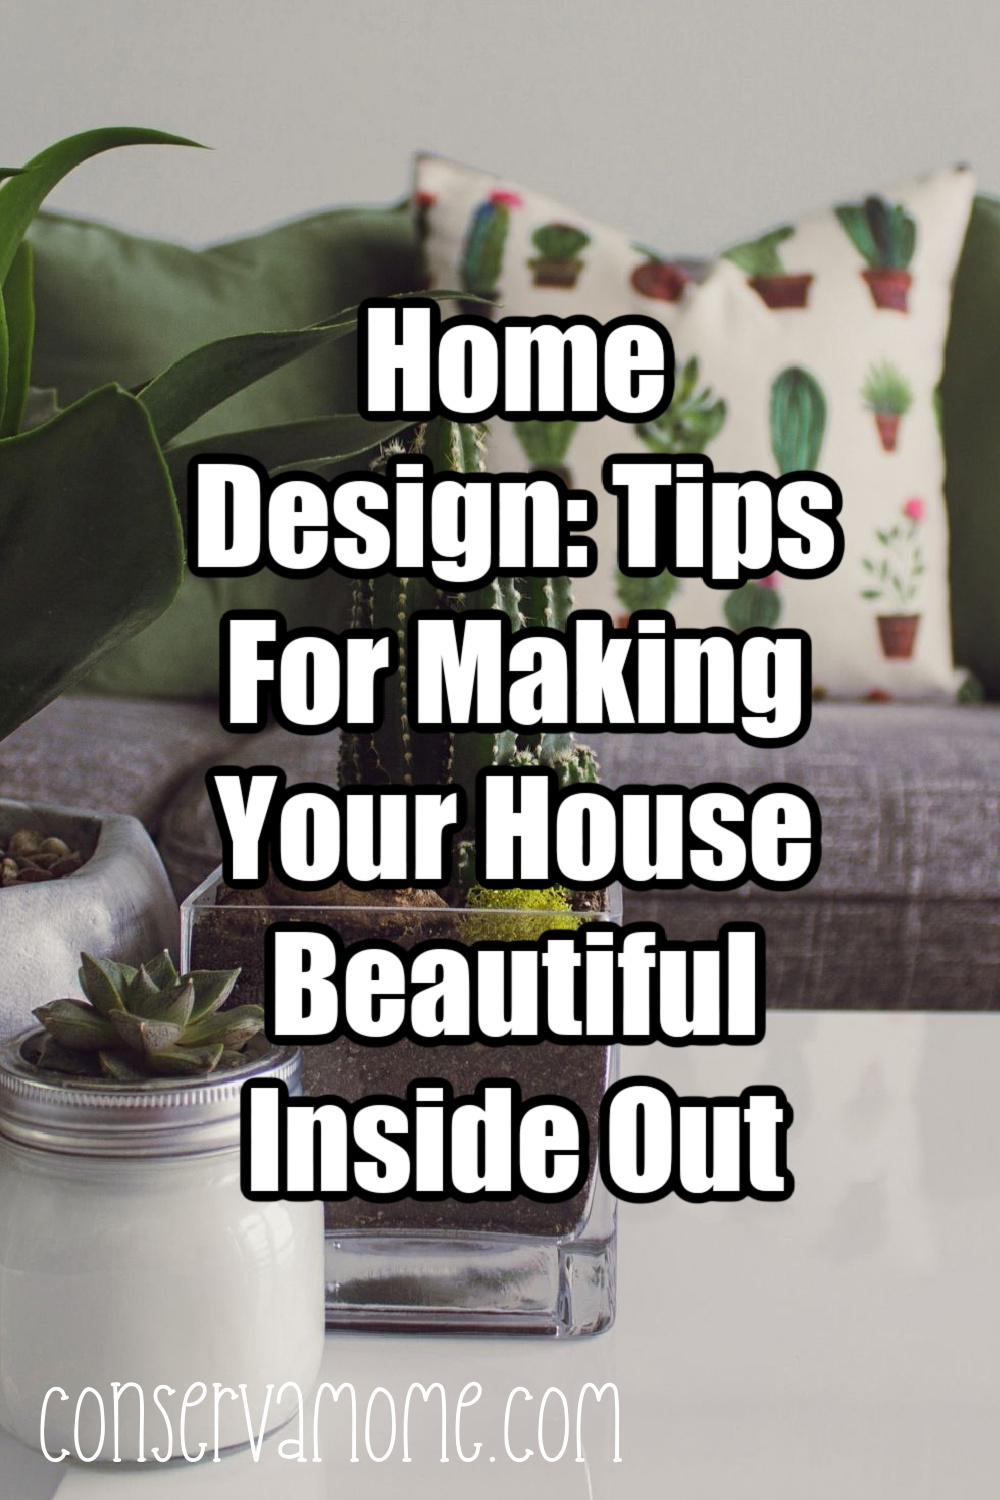 Home Design: Tips For Making Your House Beautiful Inside Out